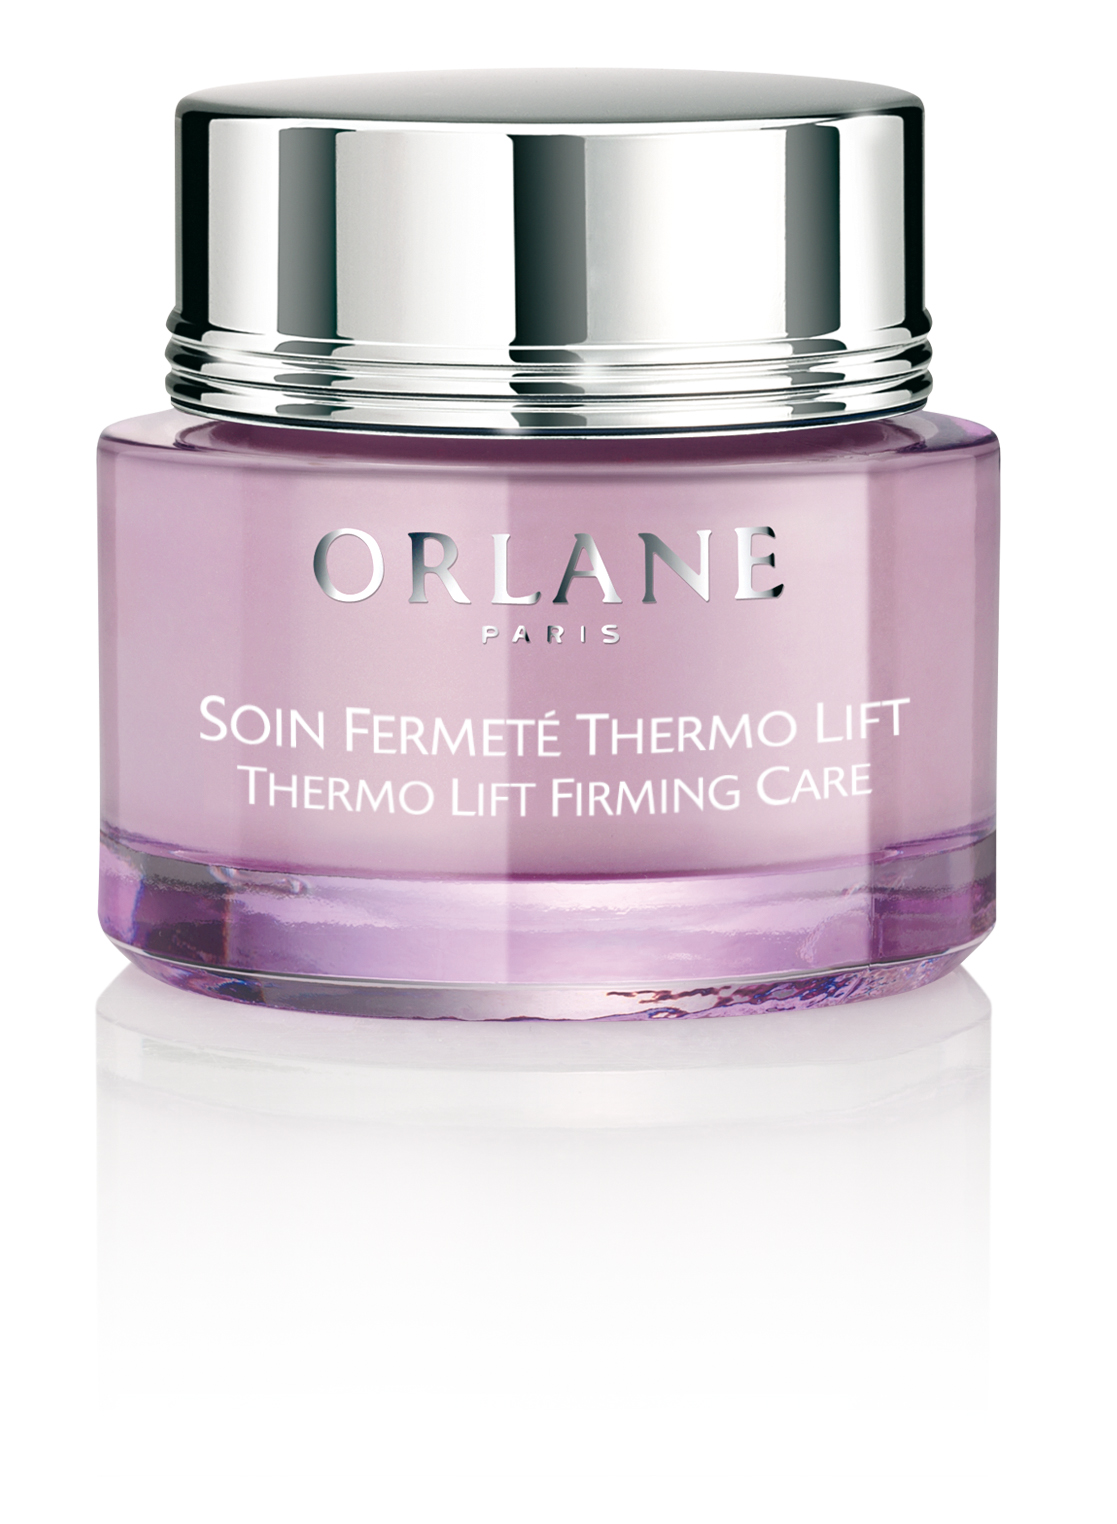 An Overnight Facelift with Thermo Lift Firming Care by Orlane